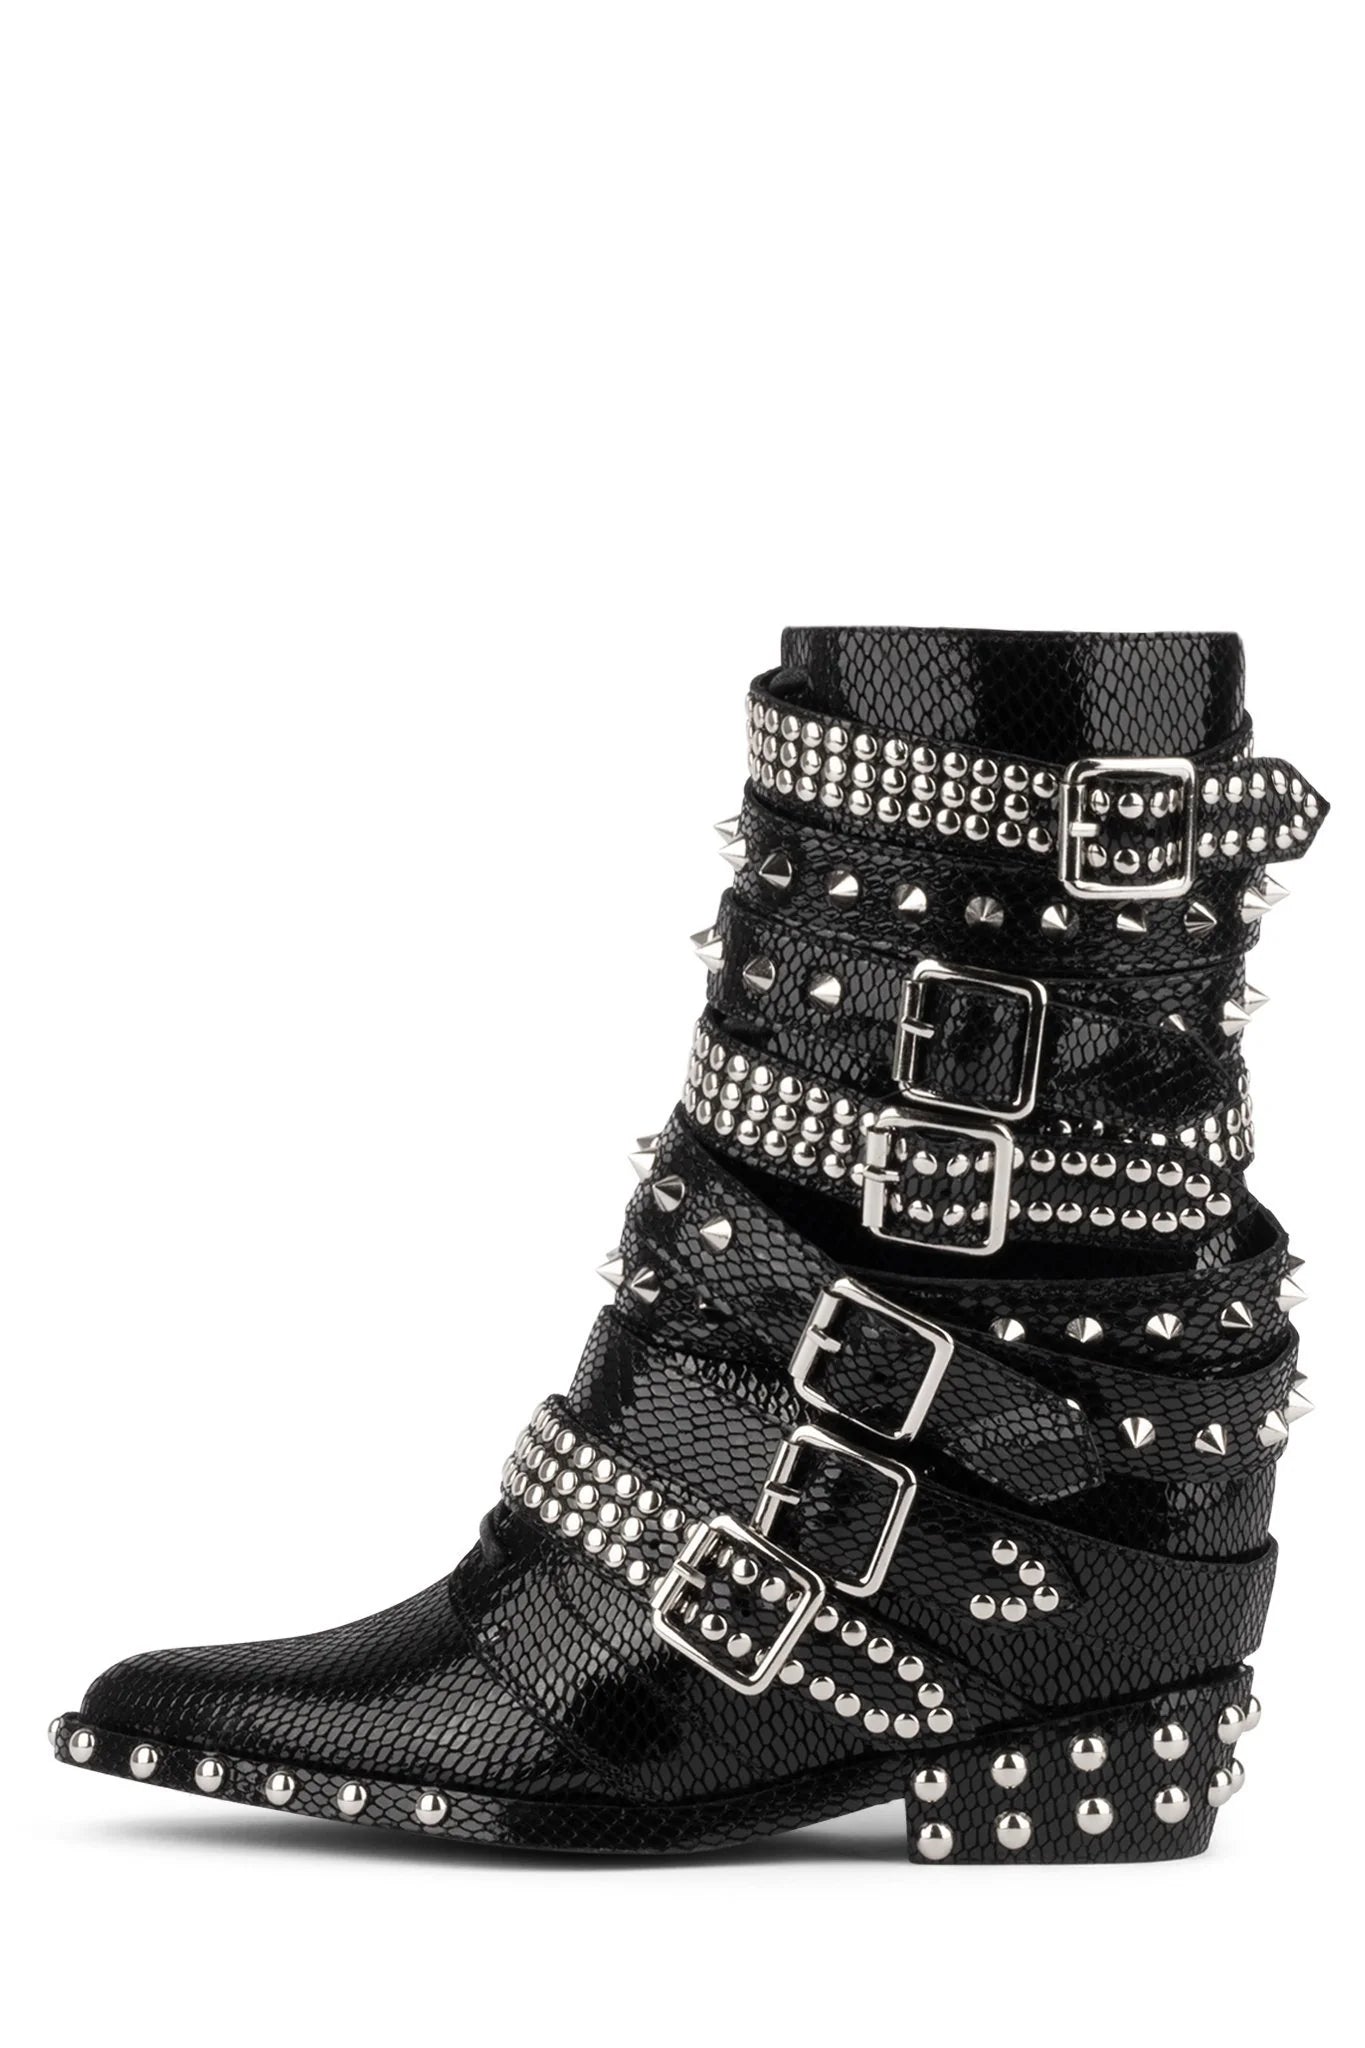 JEFFREY CAMPBELL DRACO BOOT - SNAKE SILVER